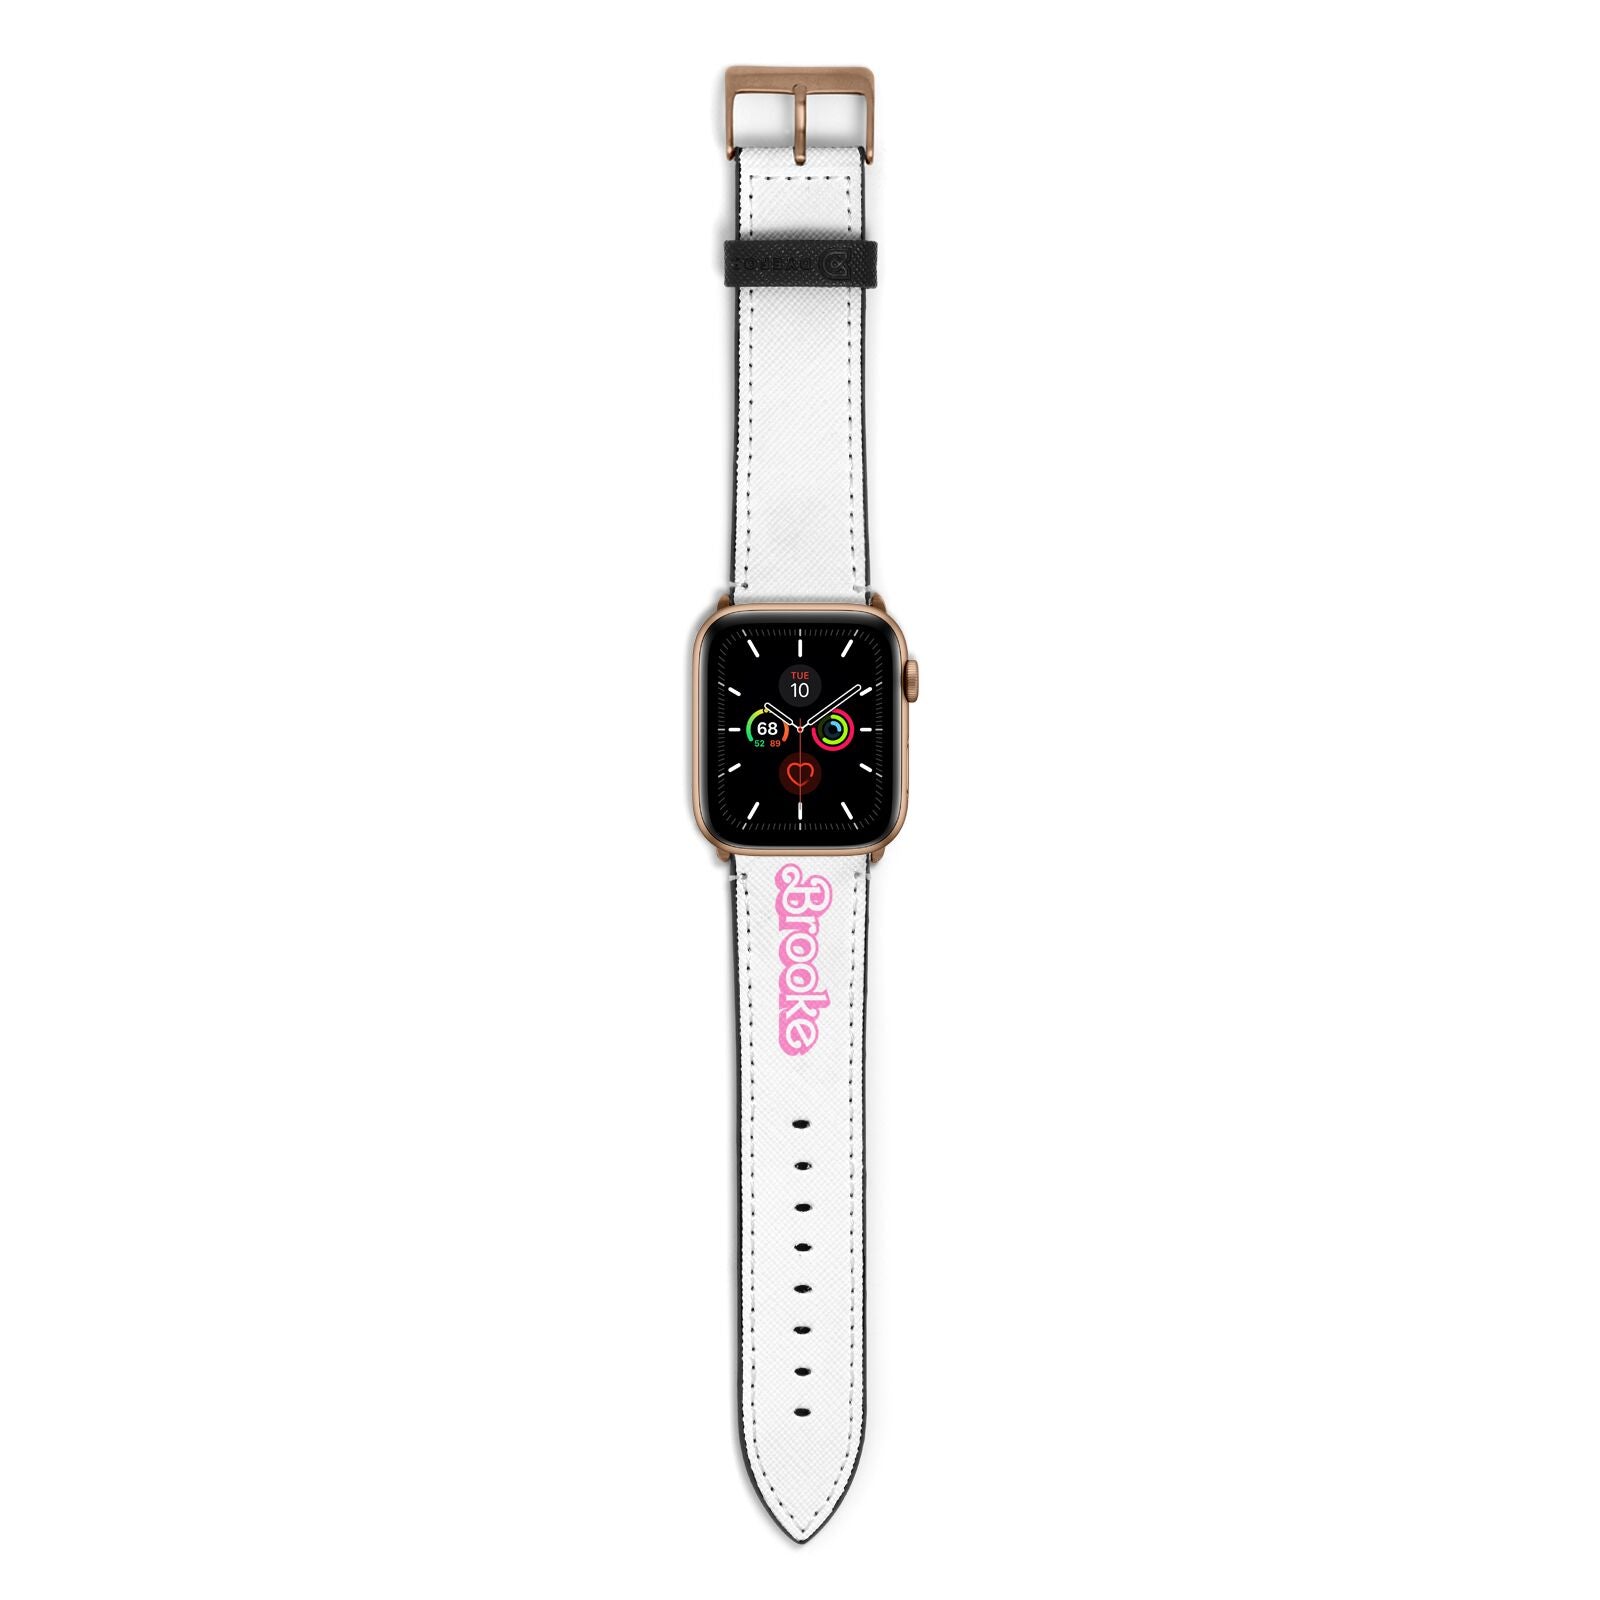 Dream Name Apple Watch Strap with Gold Hardware